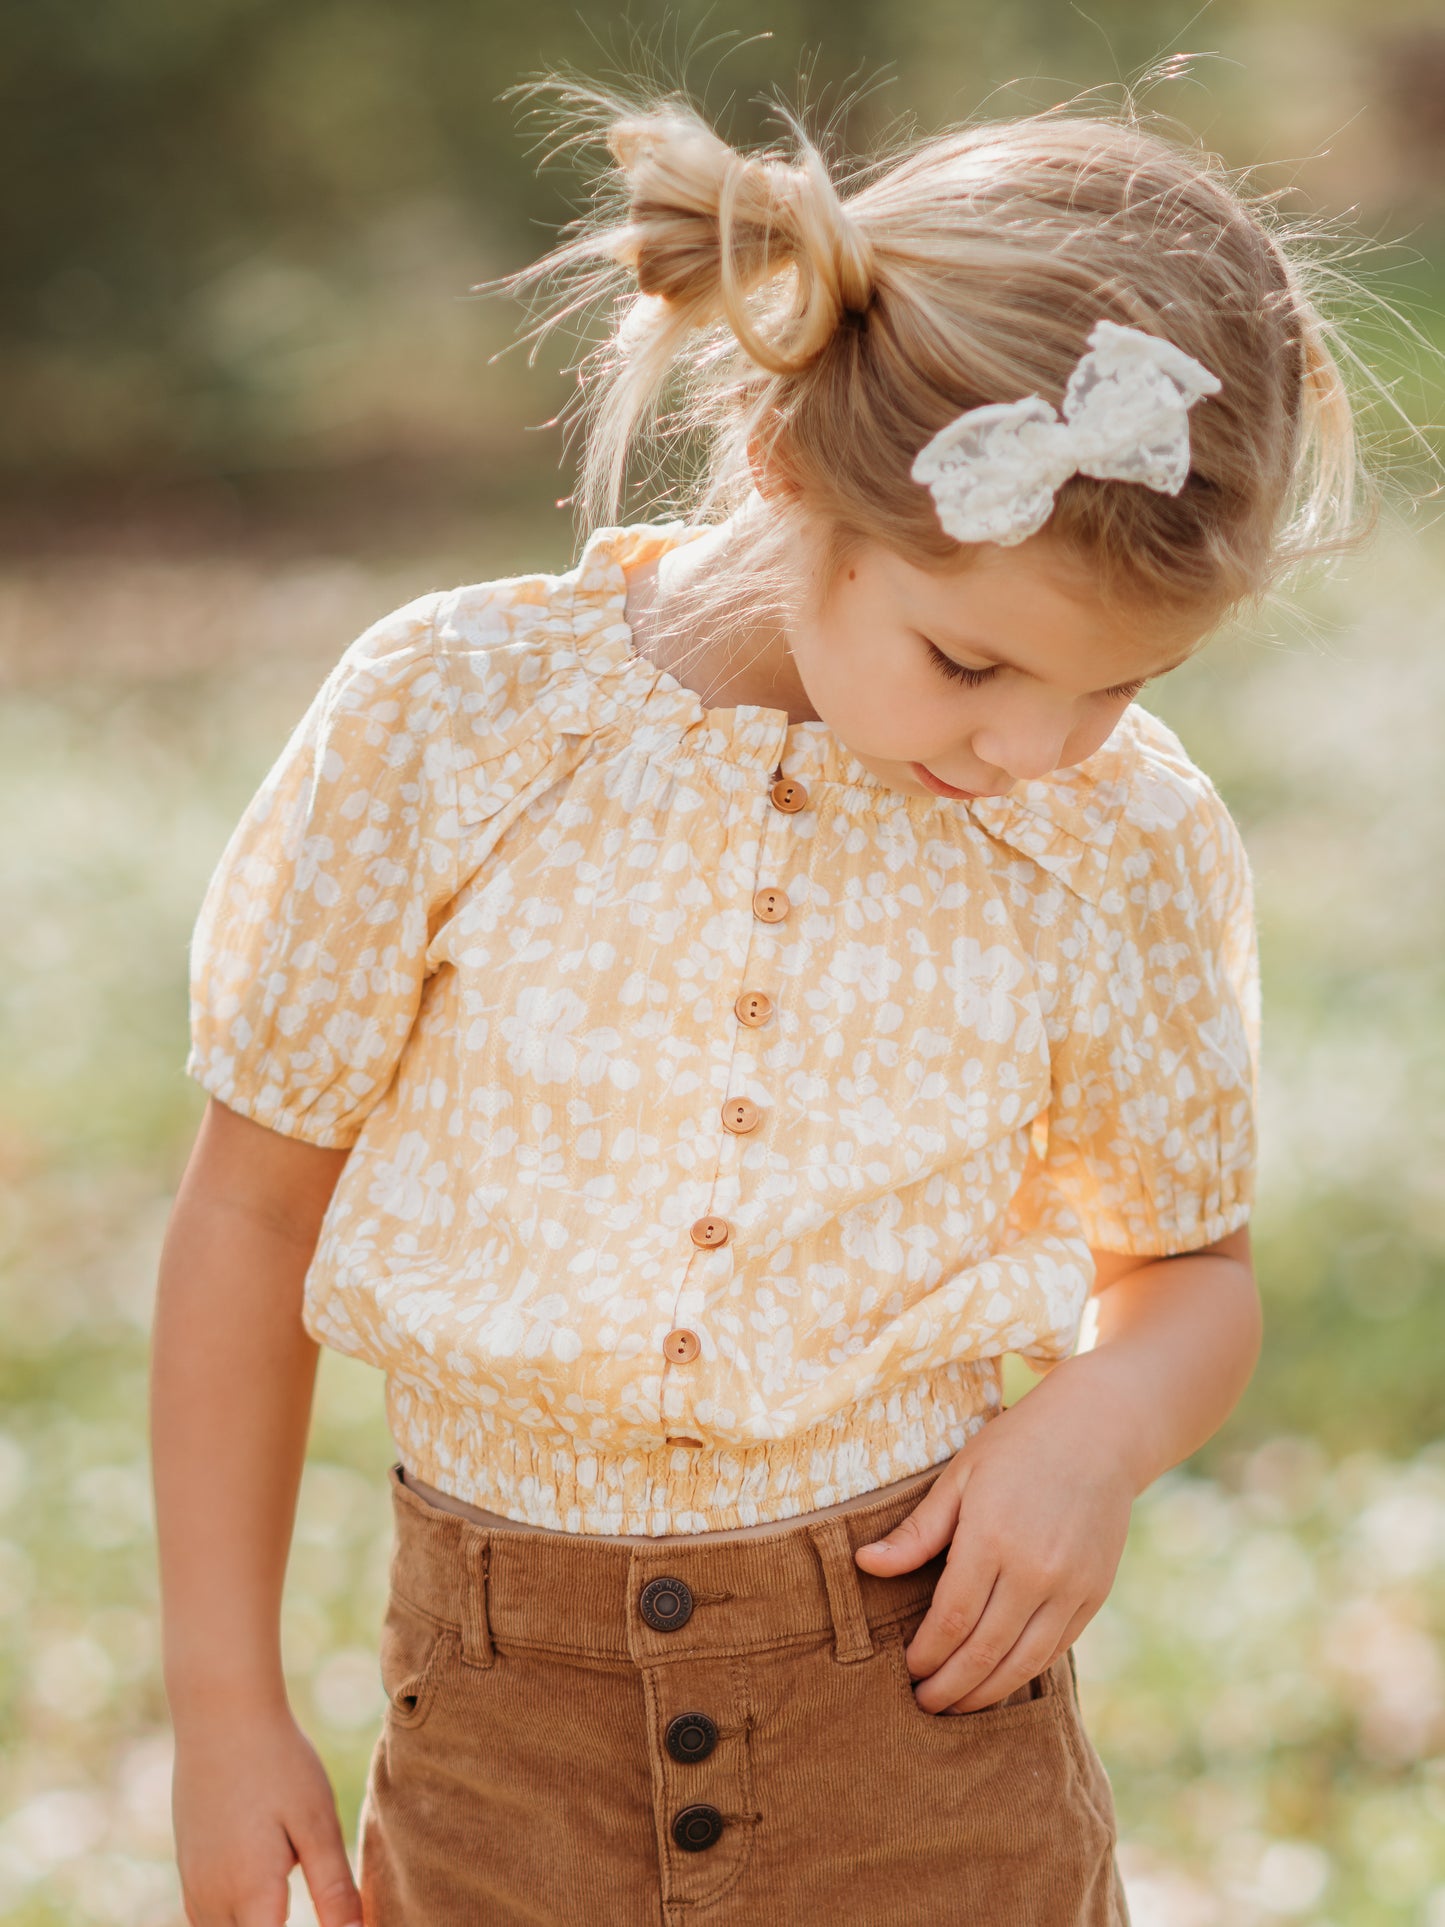 This image of a girl features the product Classic Button Top - I’ve Got Sunshine. This top has functional buttons down the bodice, puff sleeves, and elastic ruffle neckline. It is a pattern of white flowers on a bright yellow background.